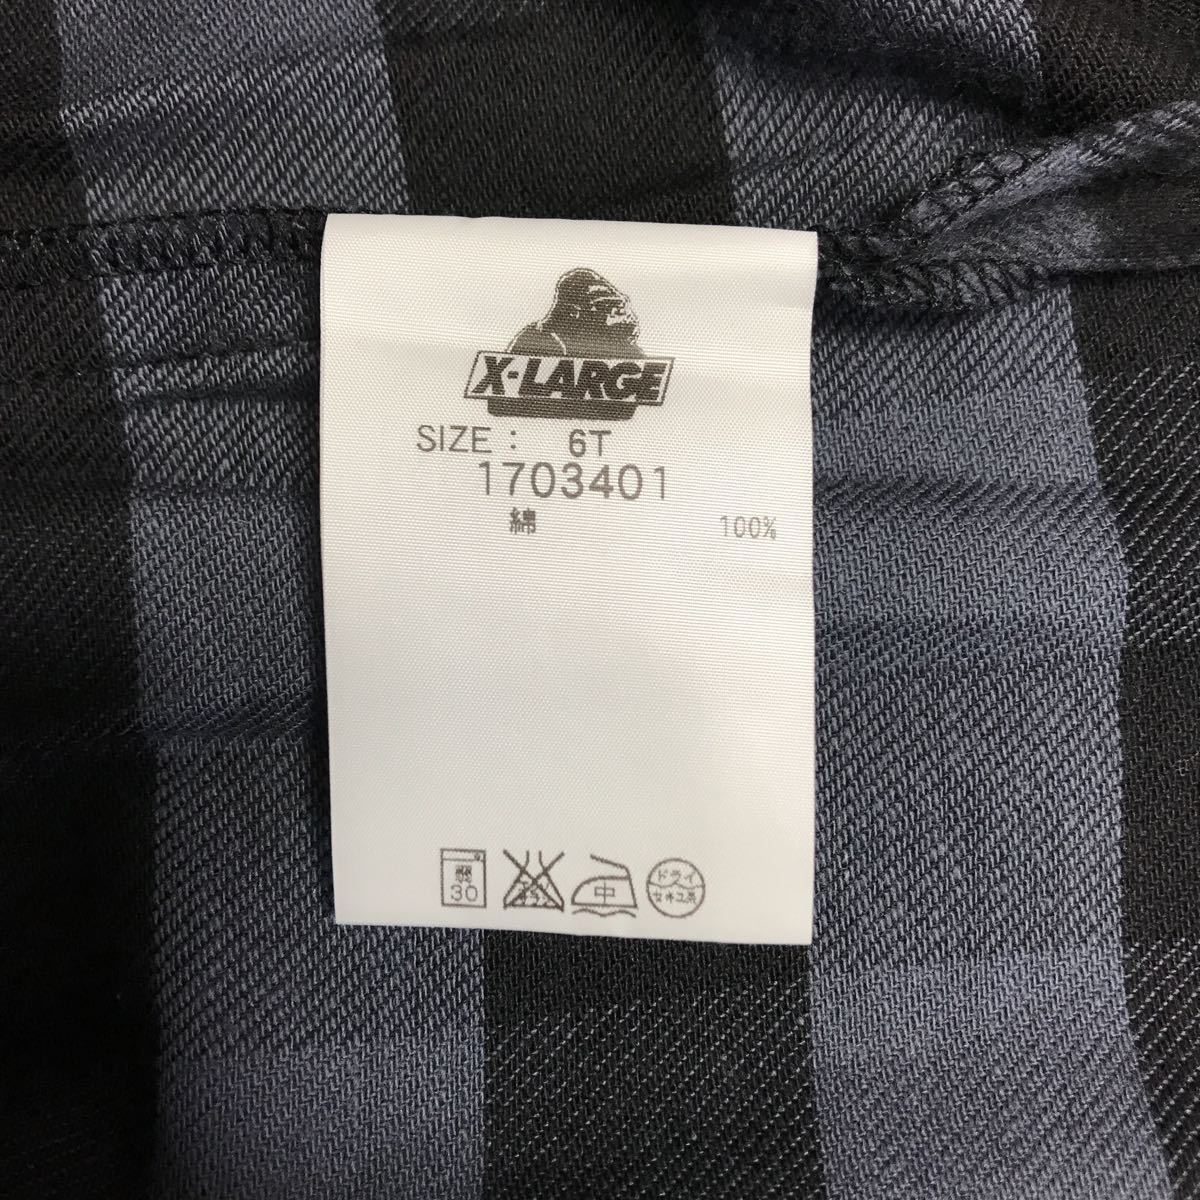 [ prompt decision old clothes ]X-LARGE KIDS/ XLarge Kids /BUFFALO PLAID SHIRT/ block check / black × gray /6T size / unused / tag attaching 